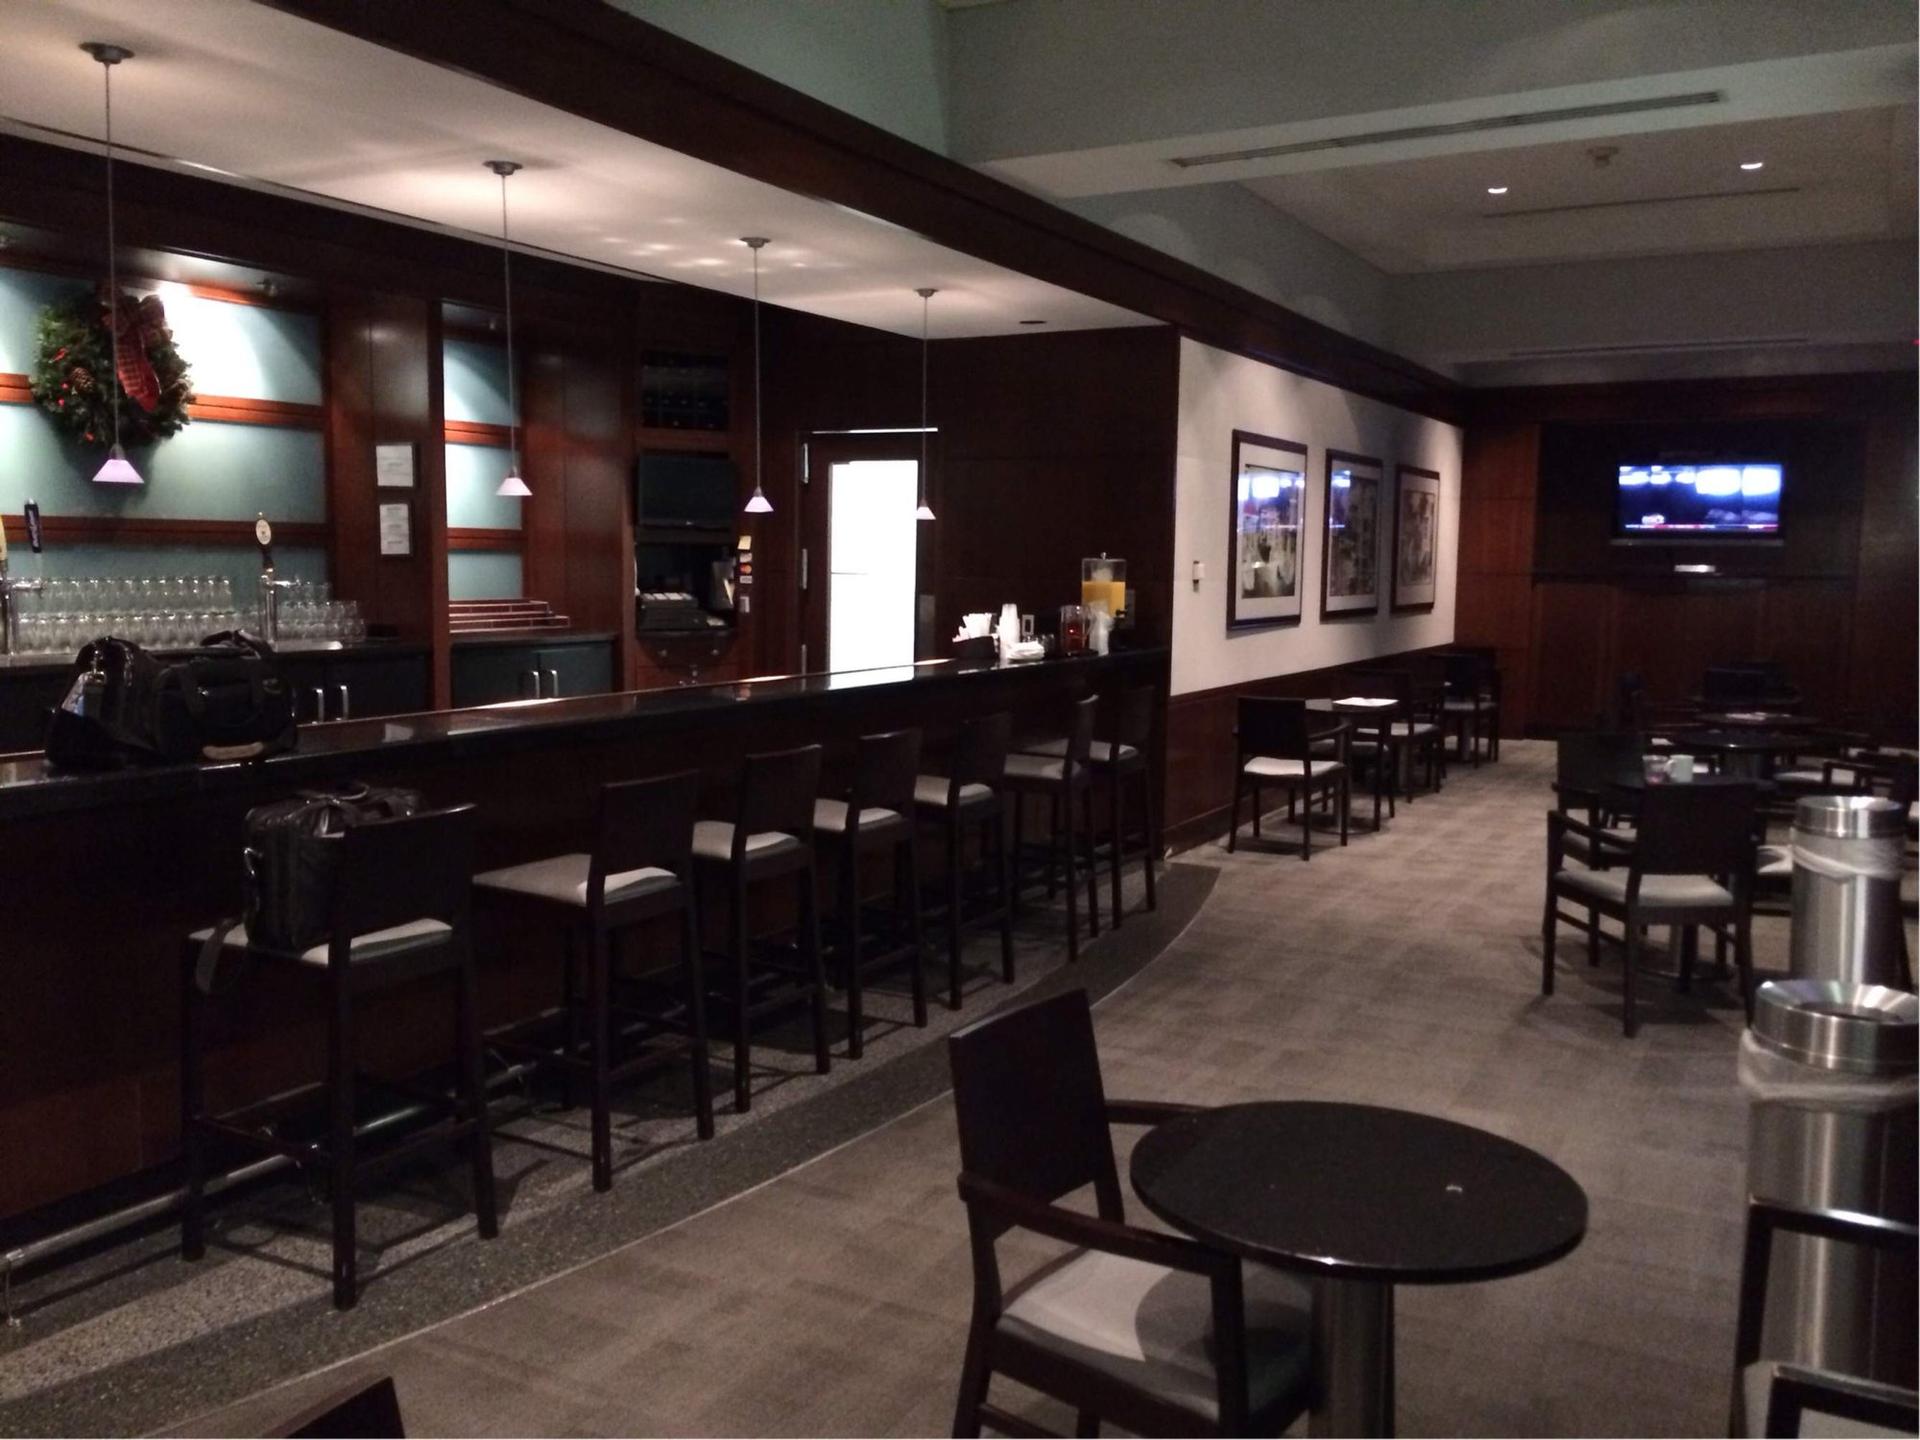 American Airlines Admirals Club image 7 of 37